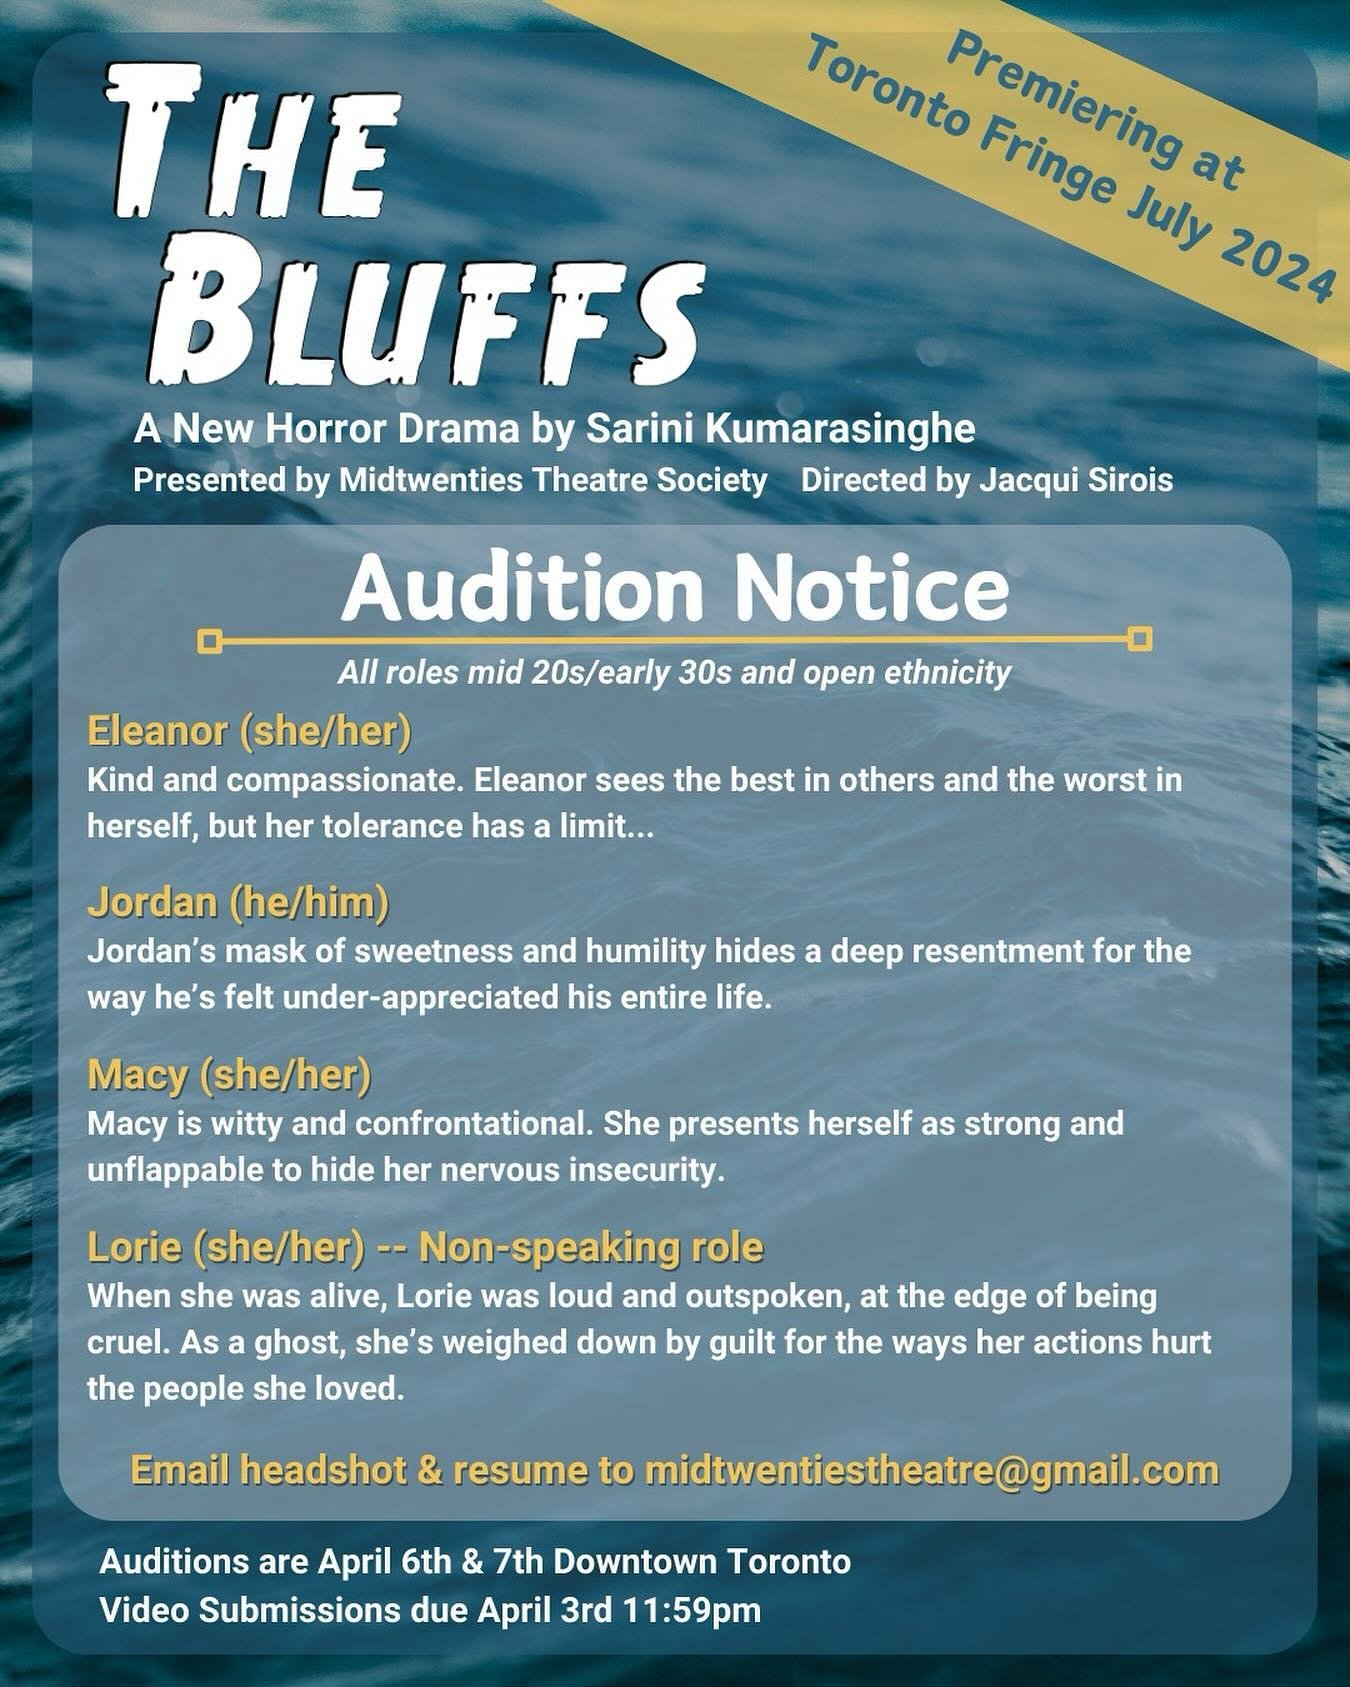 After a 4-year hiatus, Midtwenties Theatre Society is proud to be back to premiere &ldquo;THE BLUFFS&rdquo; for the 2024 Toronto Fringe Festival in July!

We are holding actor auditions in early April - If you are interested in being involved, please